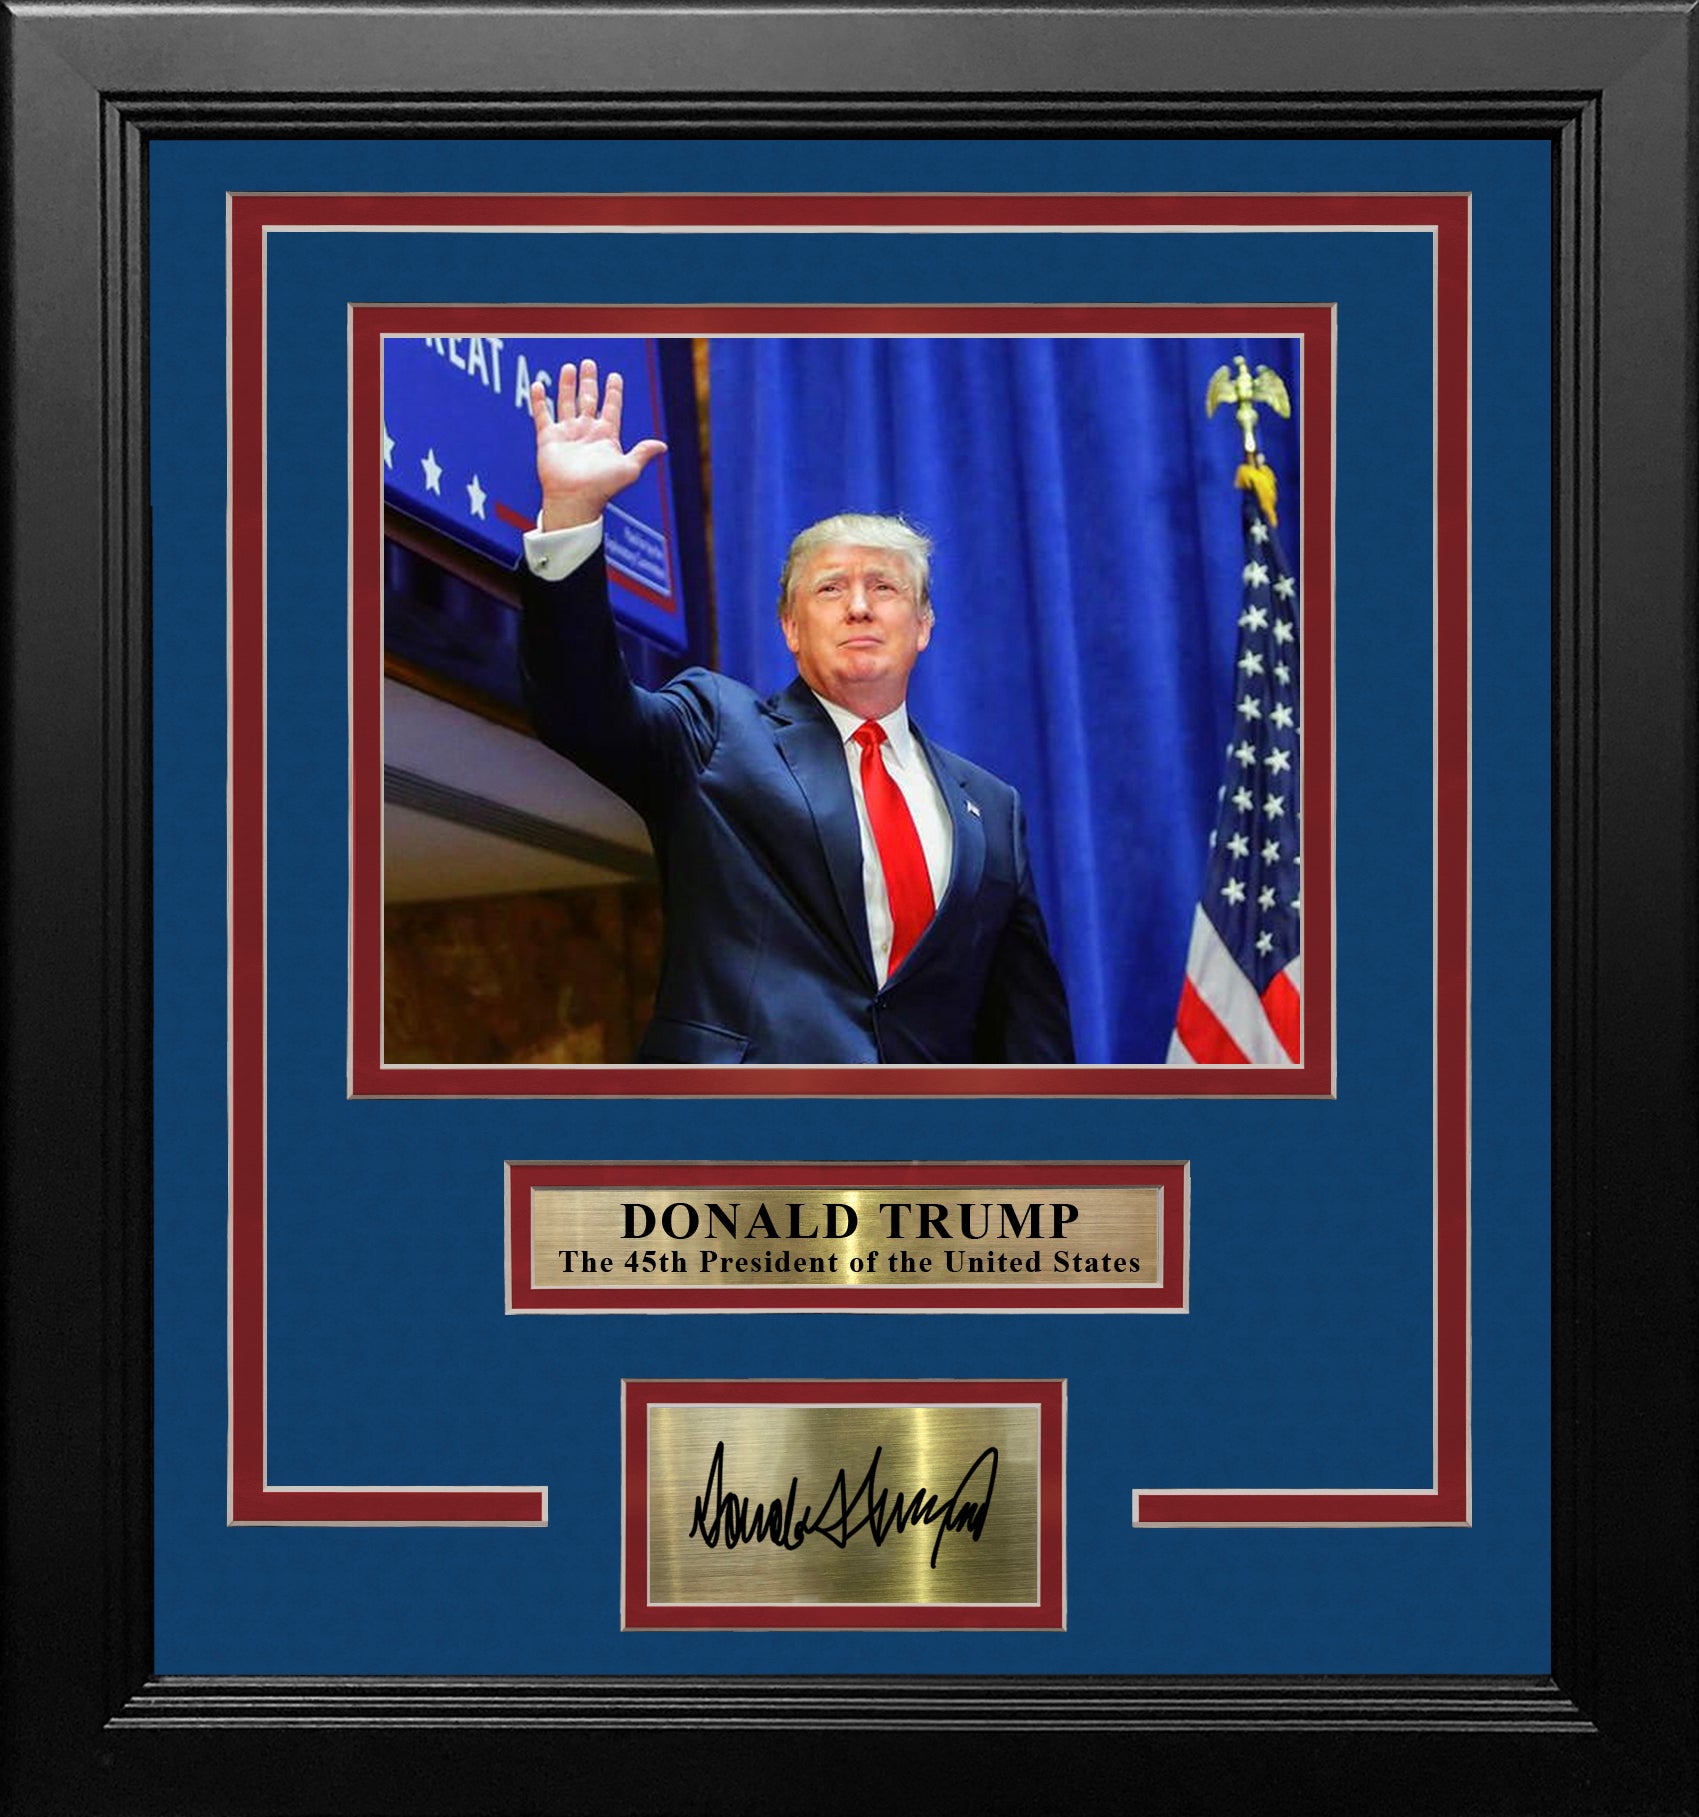 Donald Trump 45th President of the United States 8" x 10" Framed Photo with Engraved Autograph - Dynasty Sports & Framing 